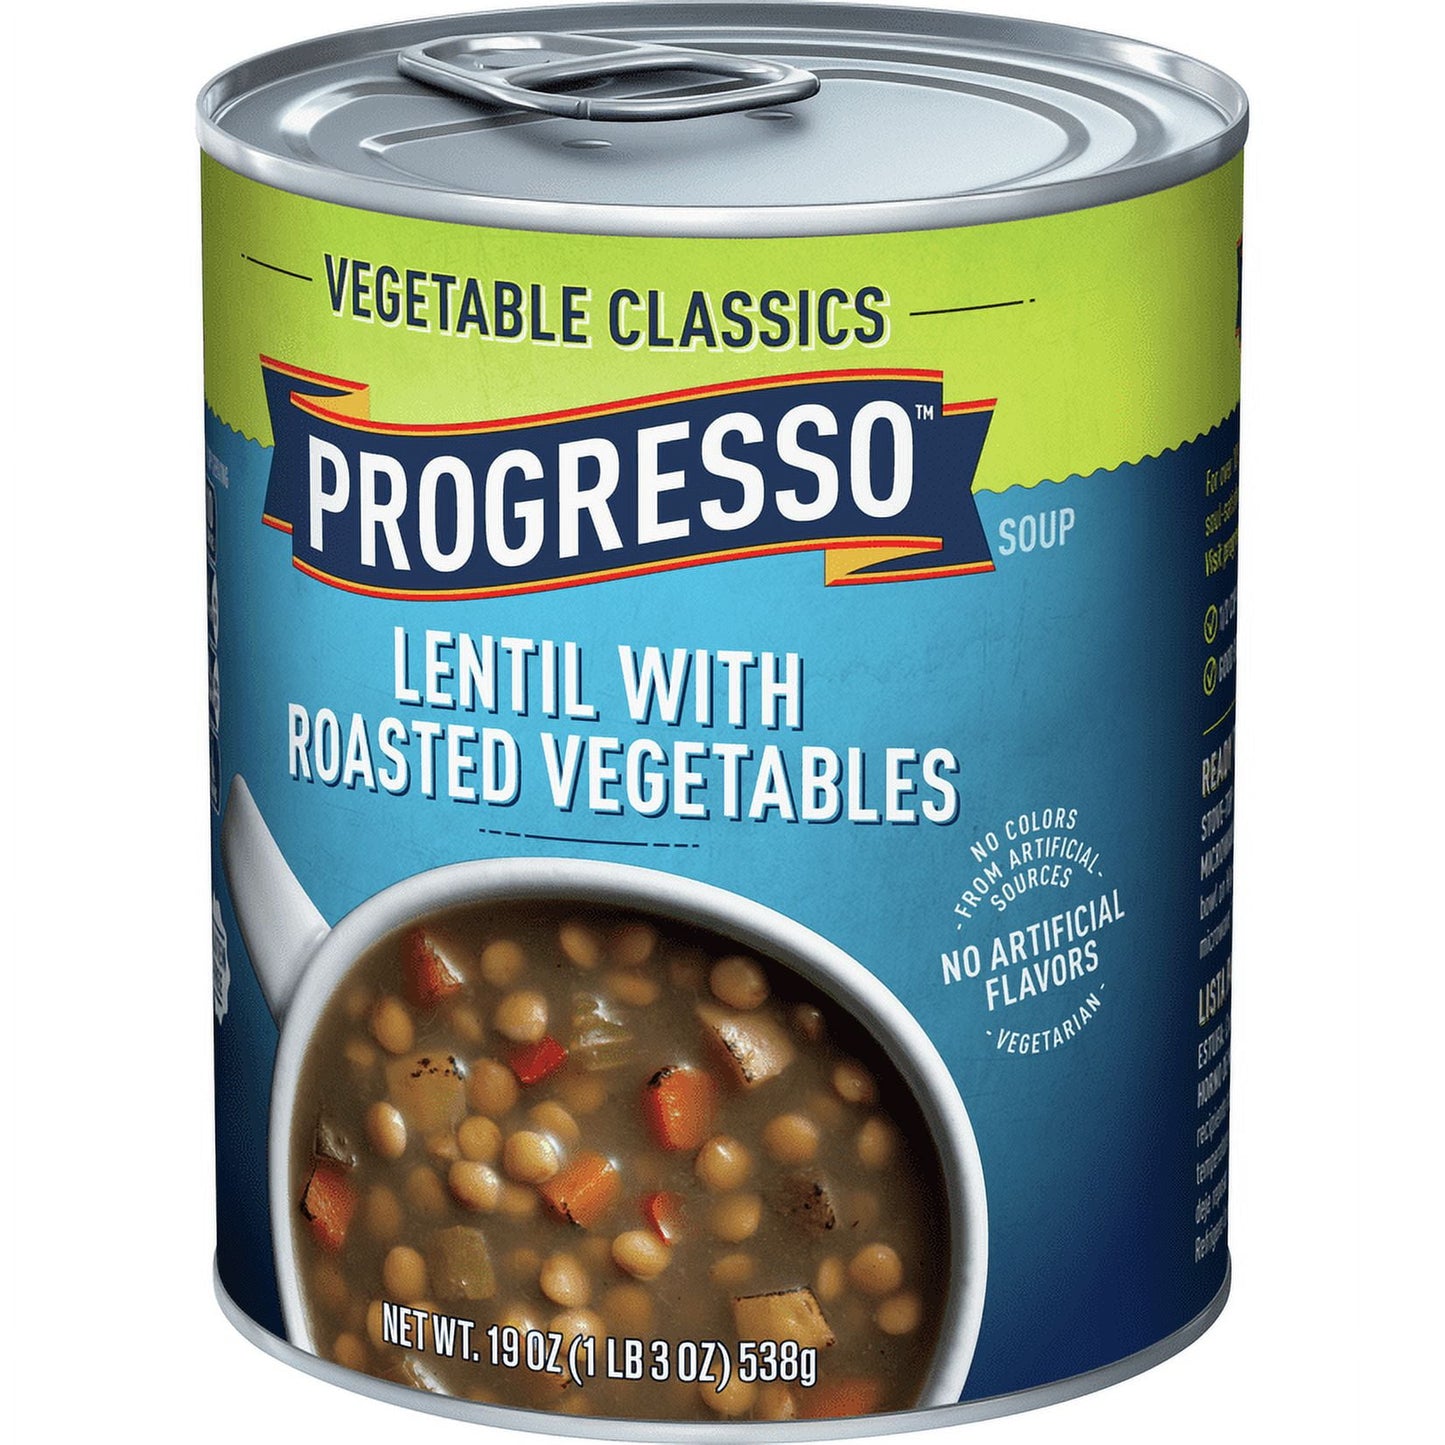 Progresso Vegetable Classics, Lentil With Roasted Vegetables Canned Soup, Gluten Free, 19 oz.